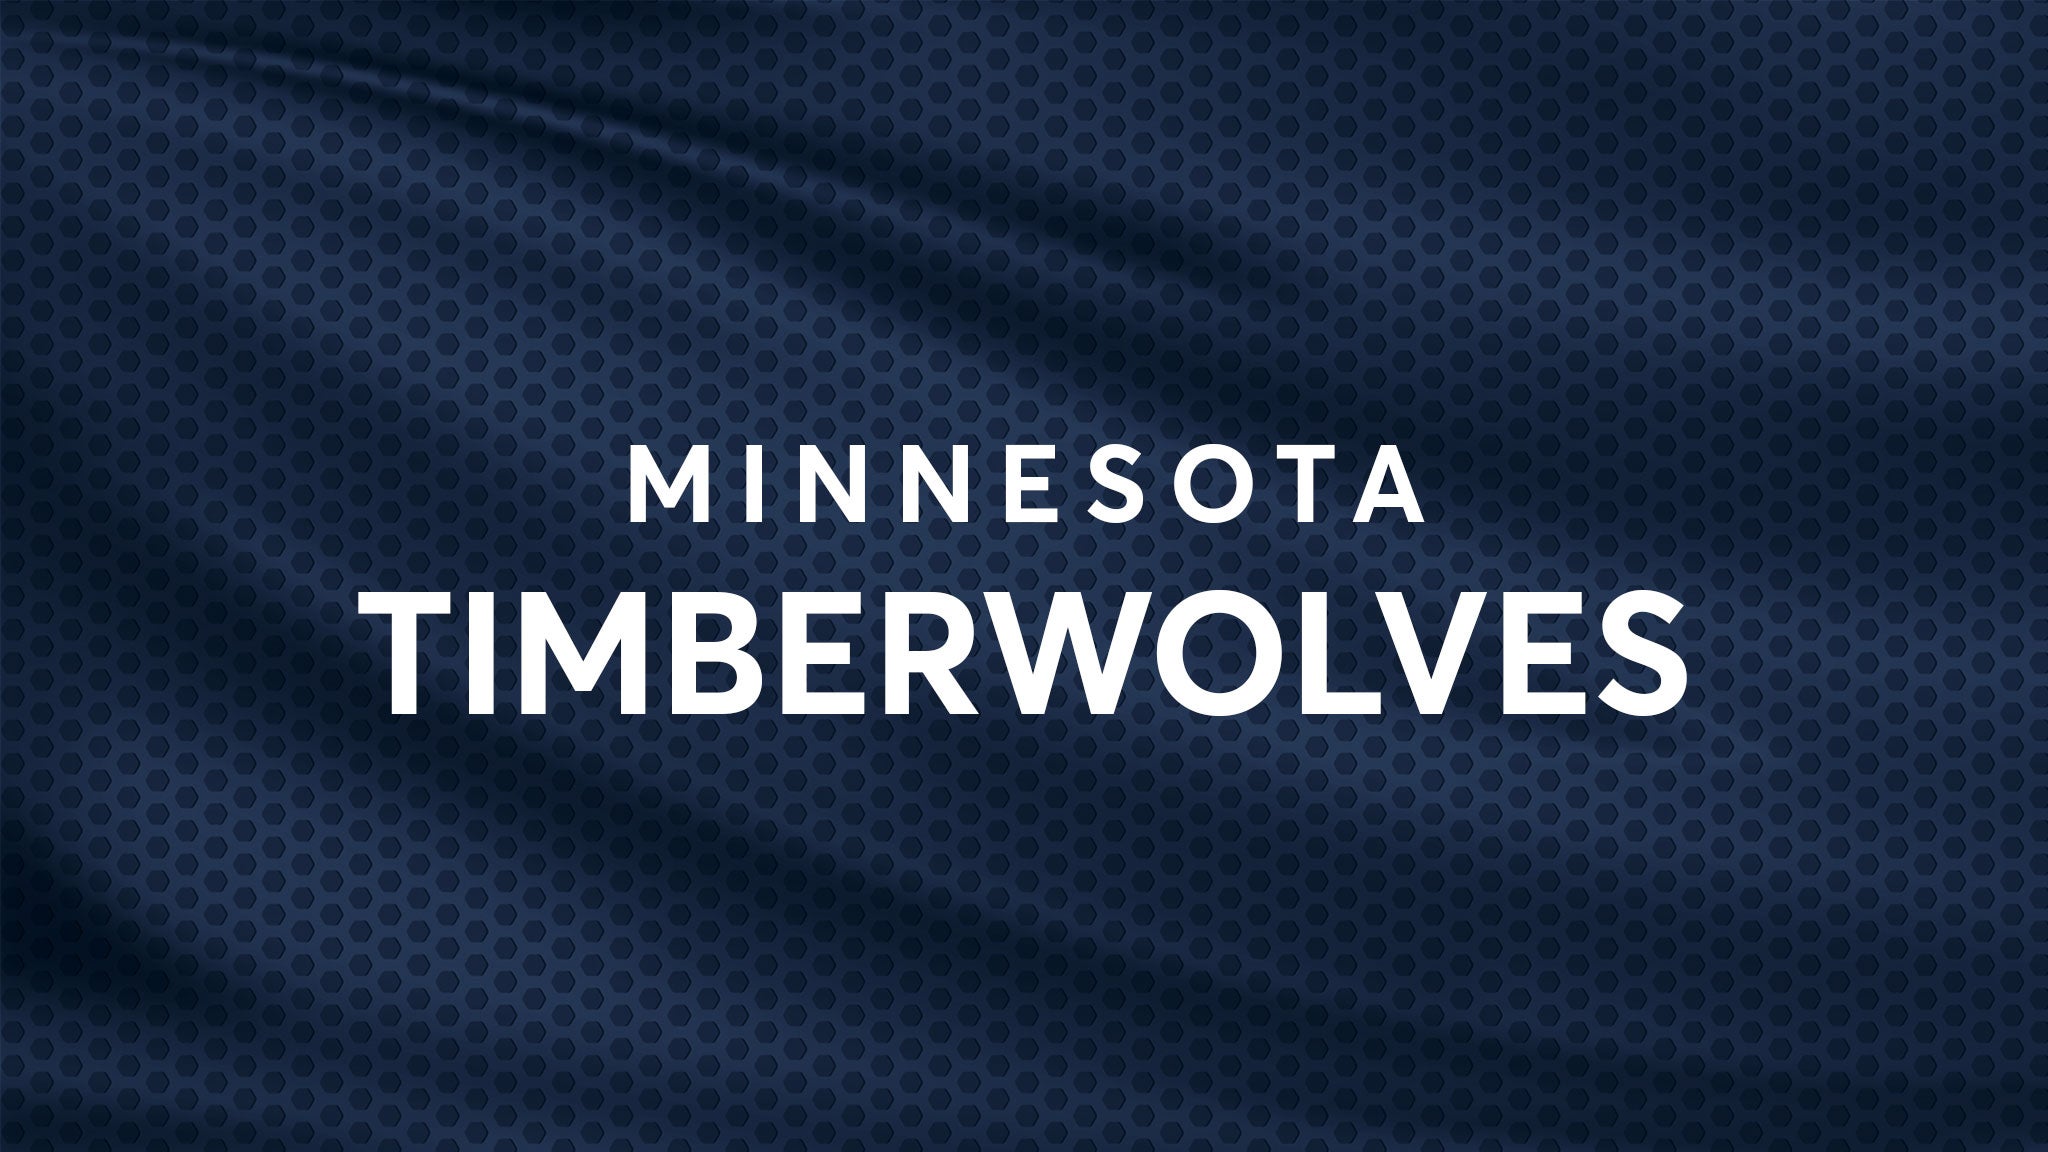 West Conf Finals: TBD at Timberwolves Rd 3 Hm Gm 2